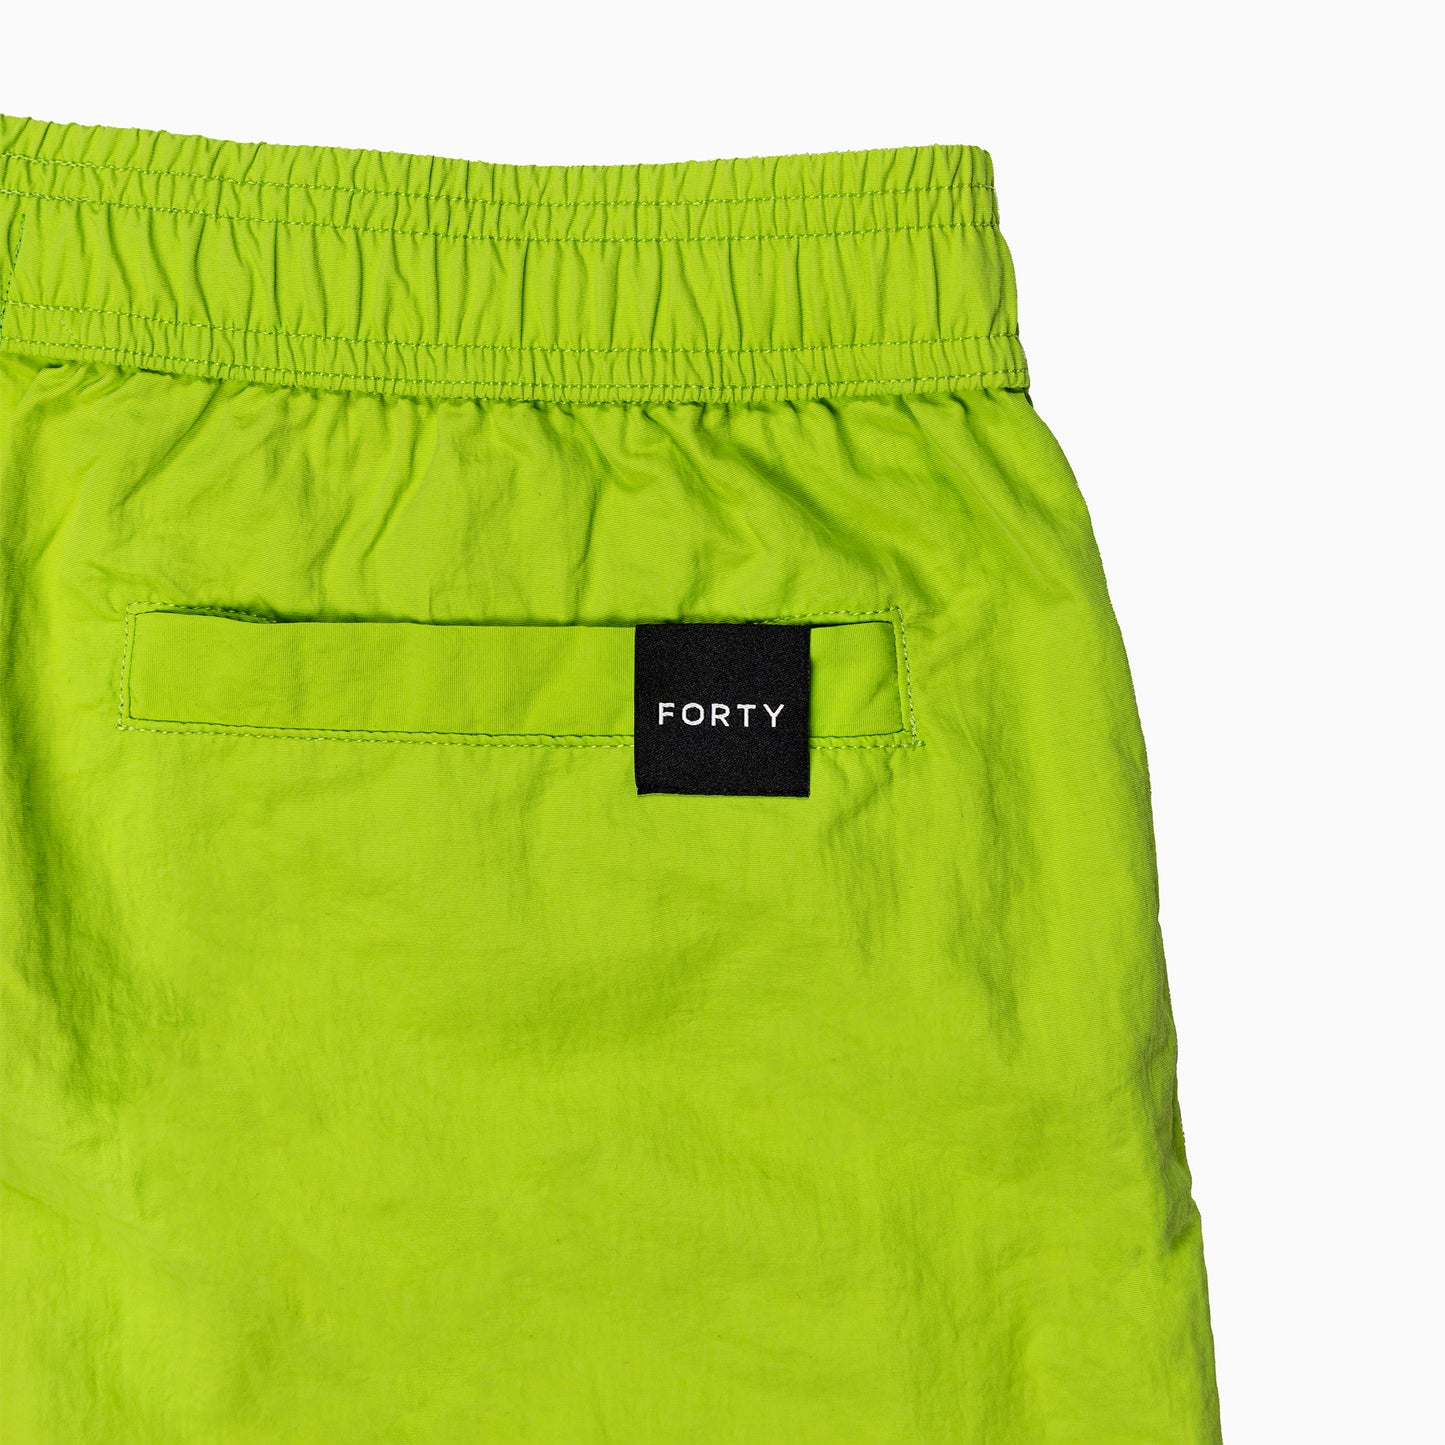 Daly Shorts (Lime Green)